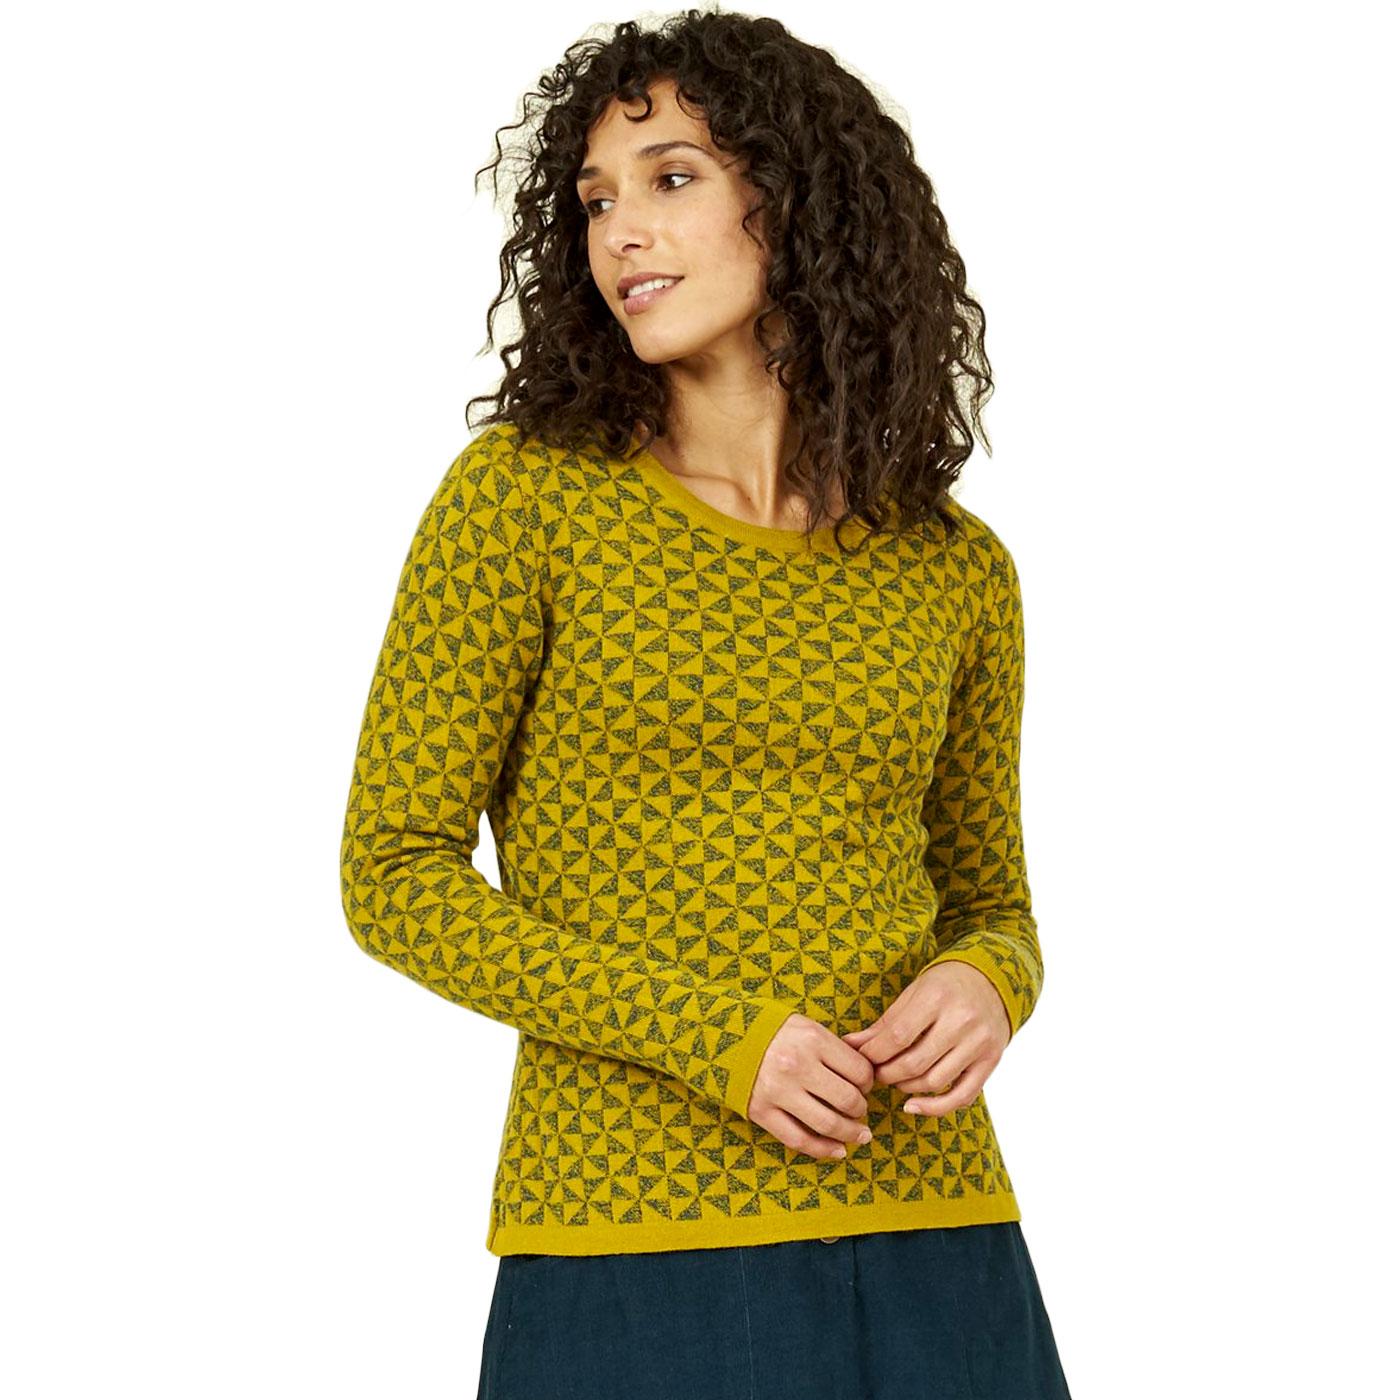 NOMADS Fitted Jacquard Kite Knit Jumper In Citron